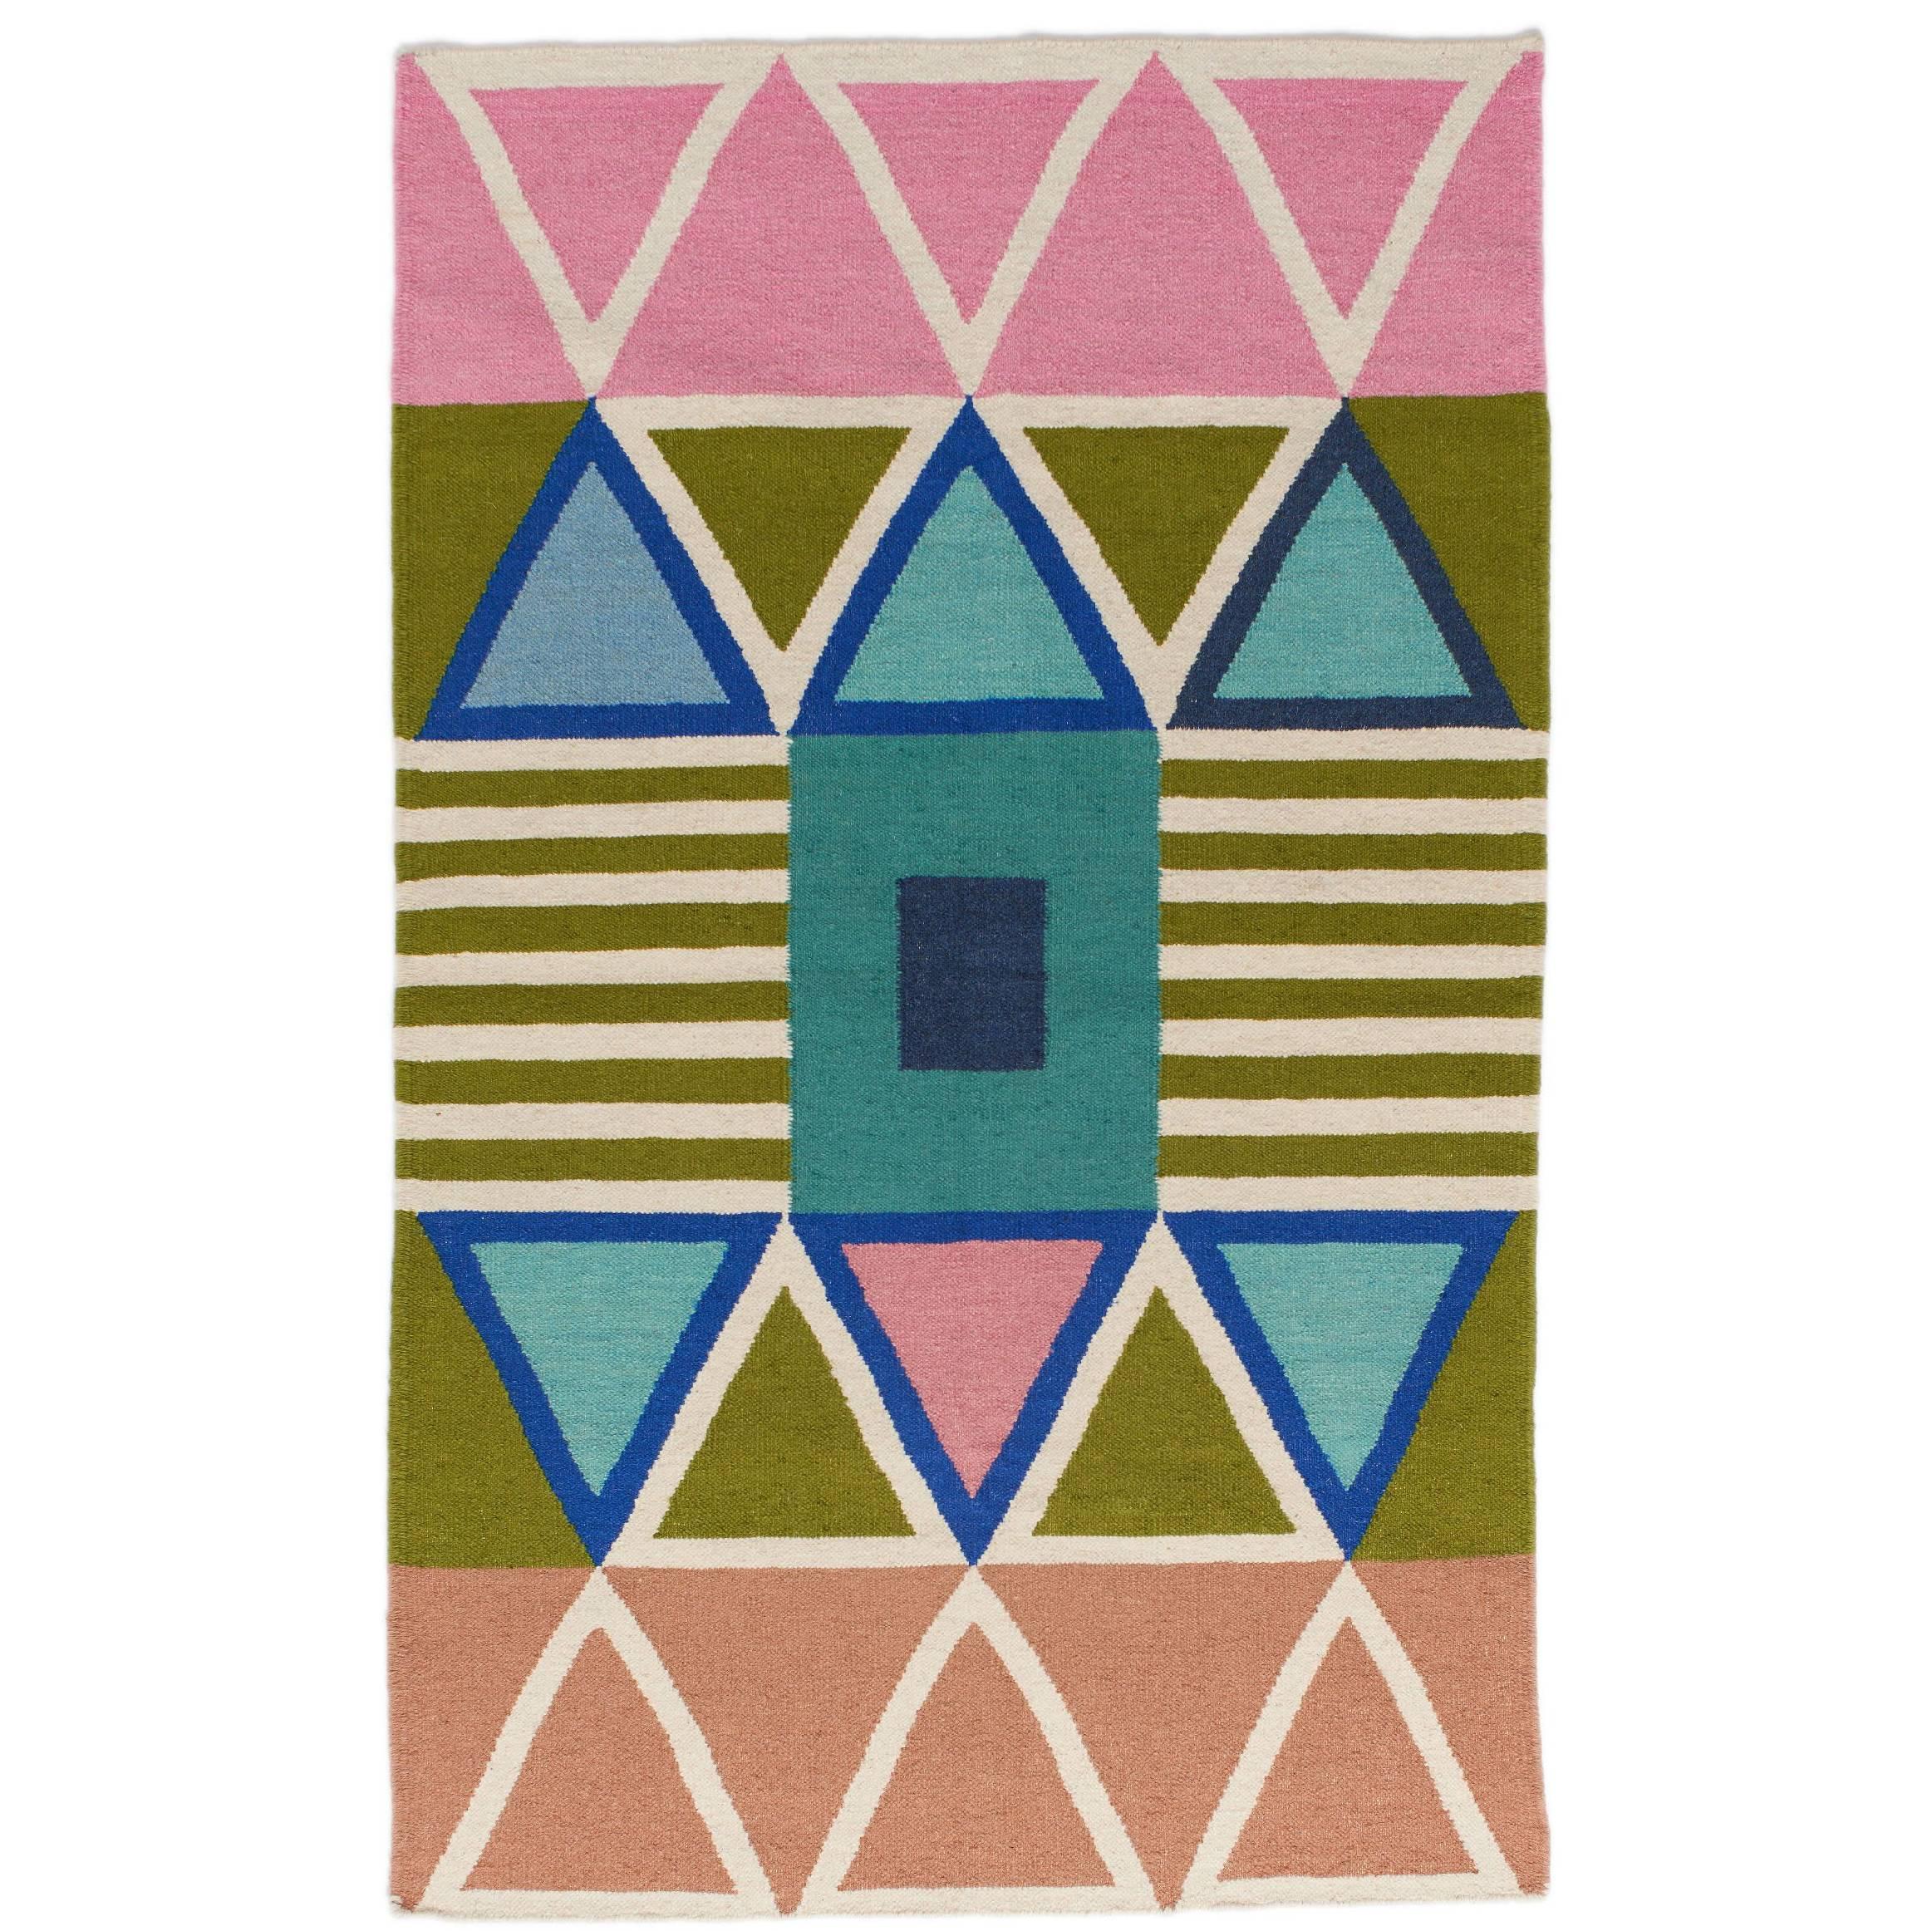 Bright Modern Dhurrie Handwoven Geometric Colorful Pink Blue Rug 8'x10' 